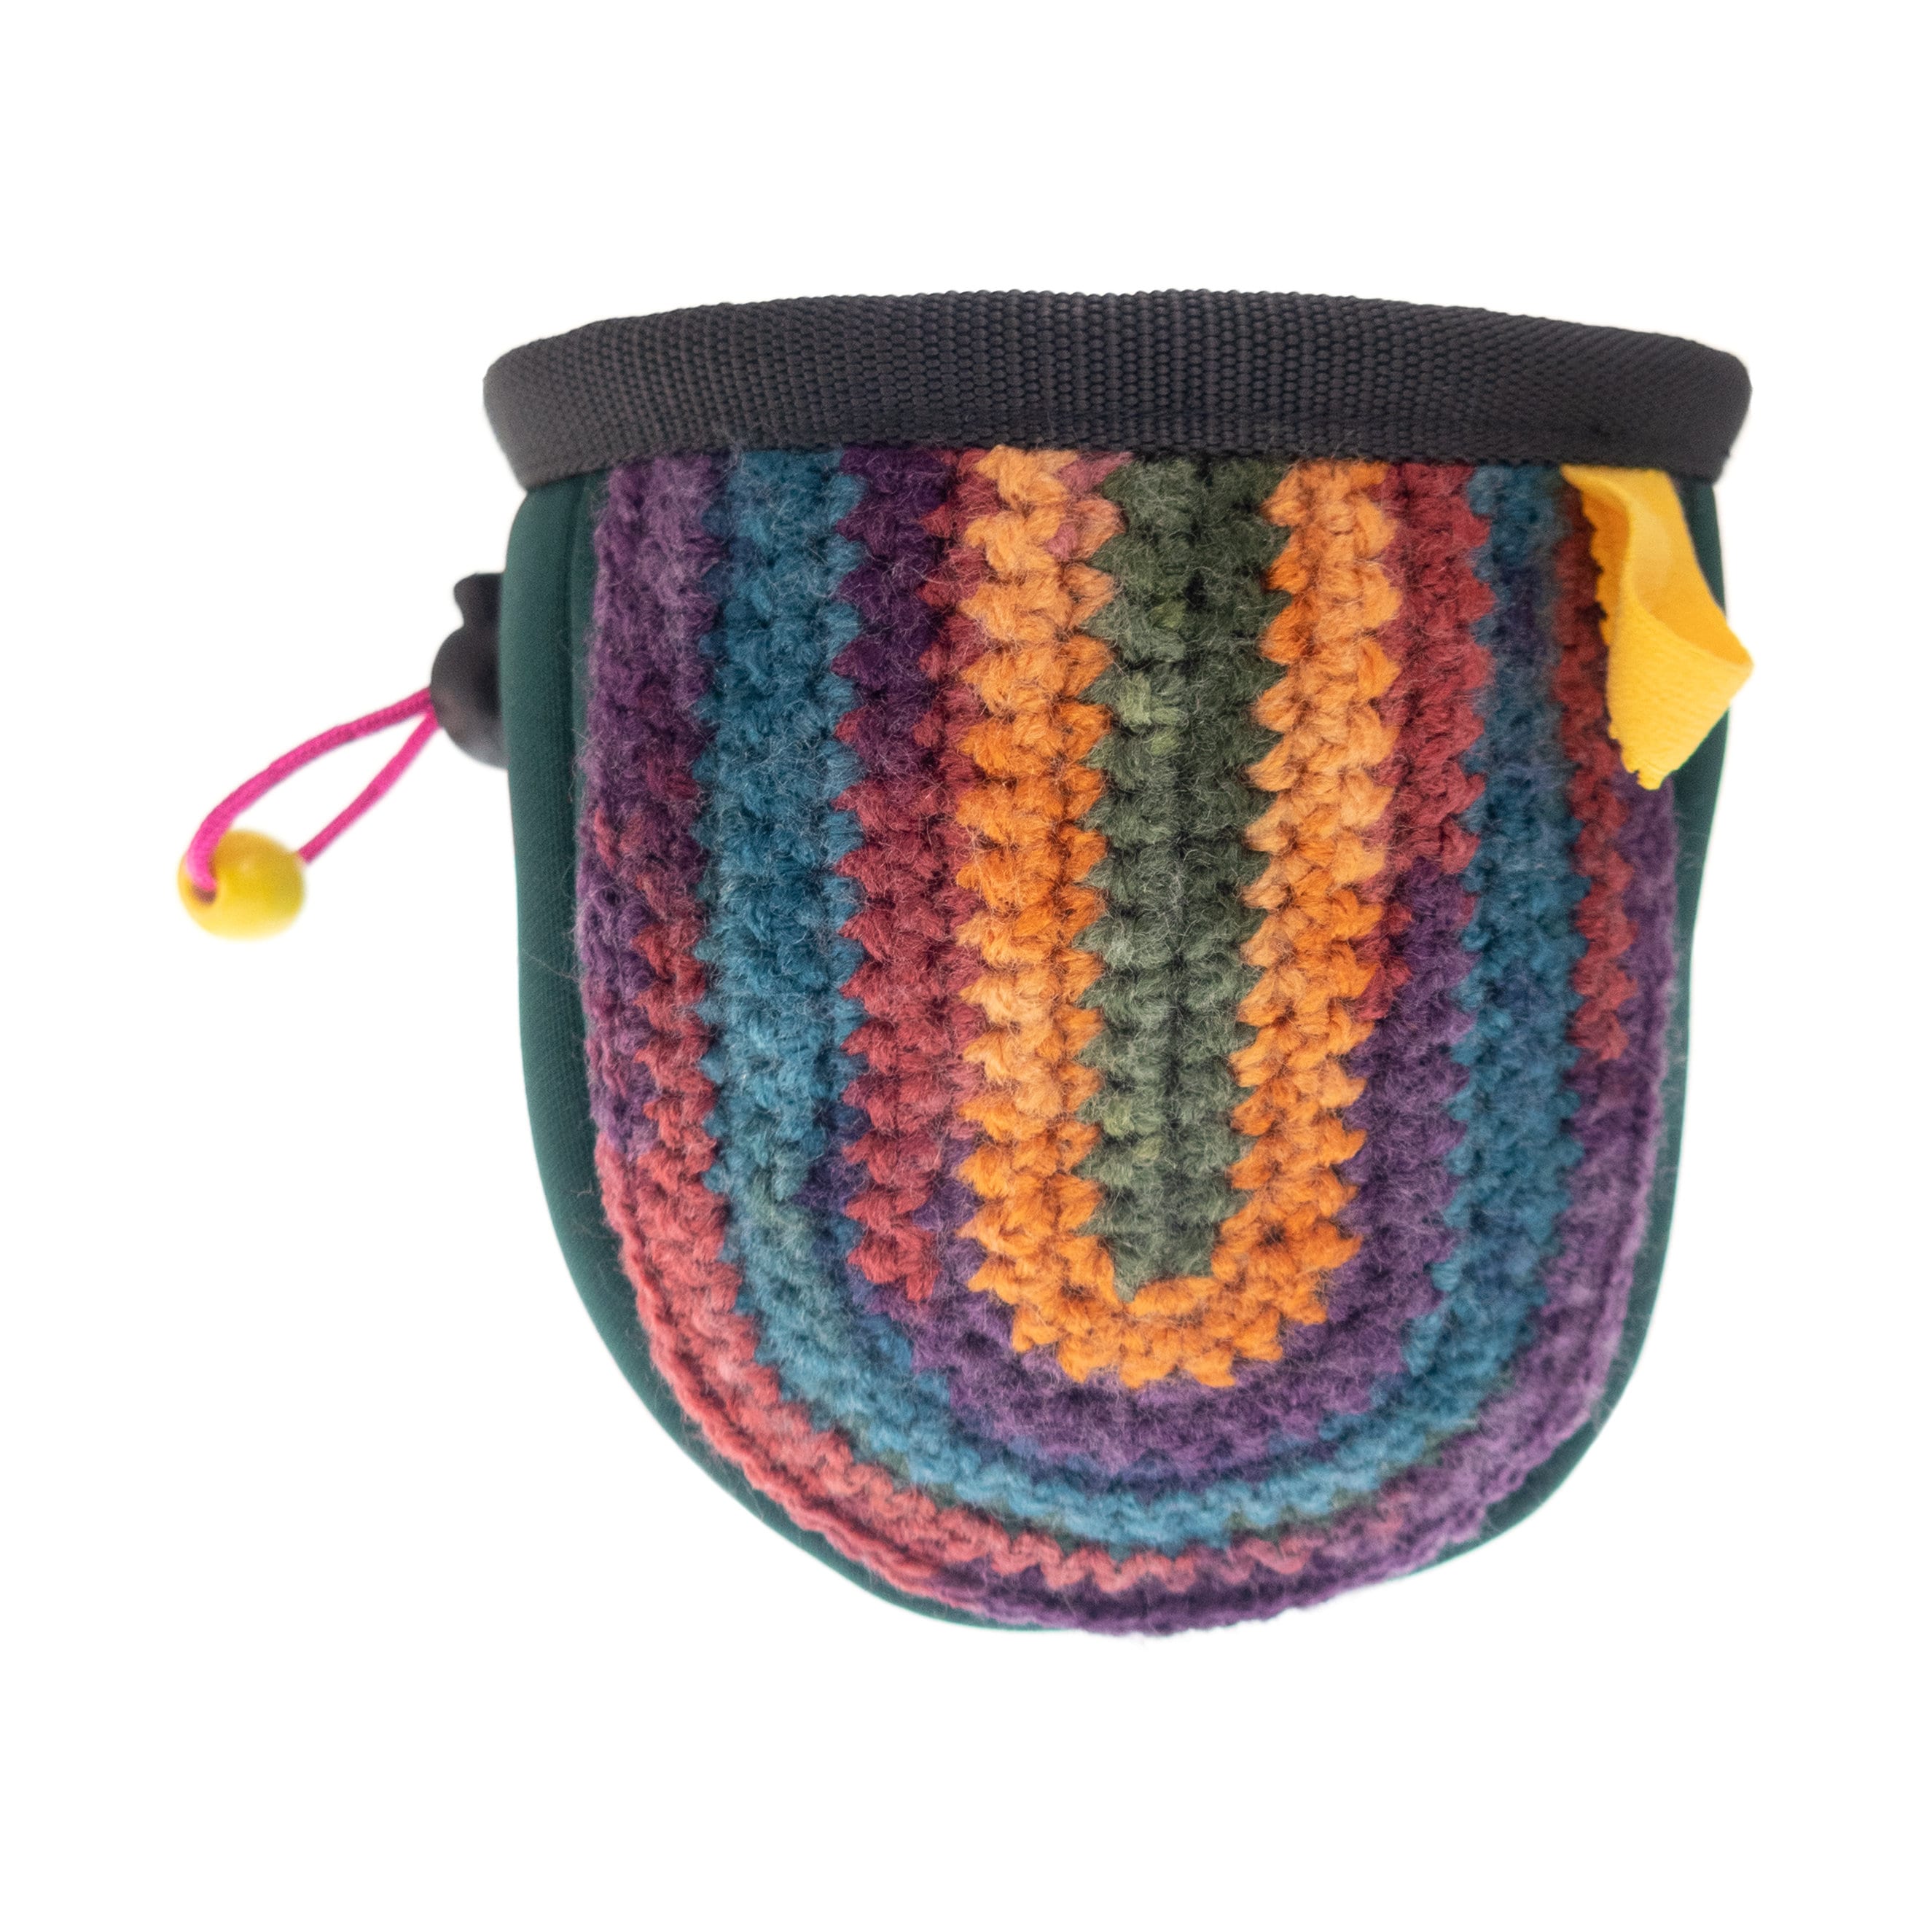 Two Loops Bouldering Chalk Bag Climbing Gear for Indoor and Traditional  Rock Climbing. Bouldering Bucket of Neoprene, Crochet. M Size